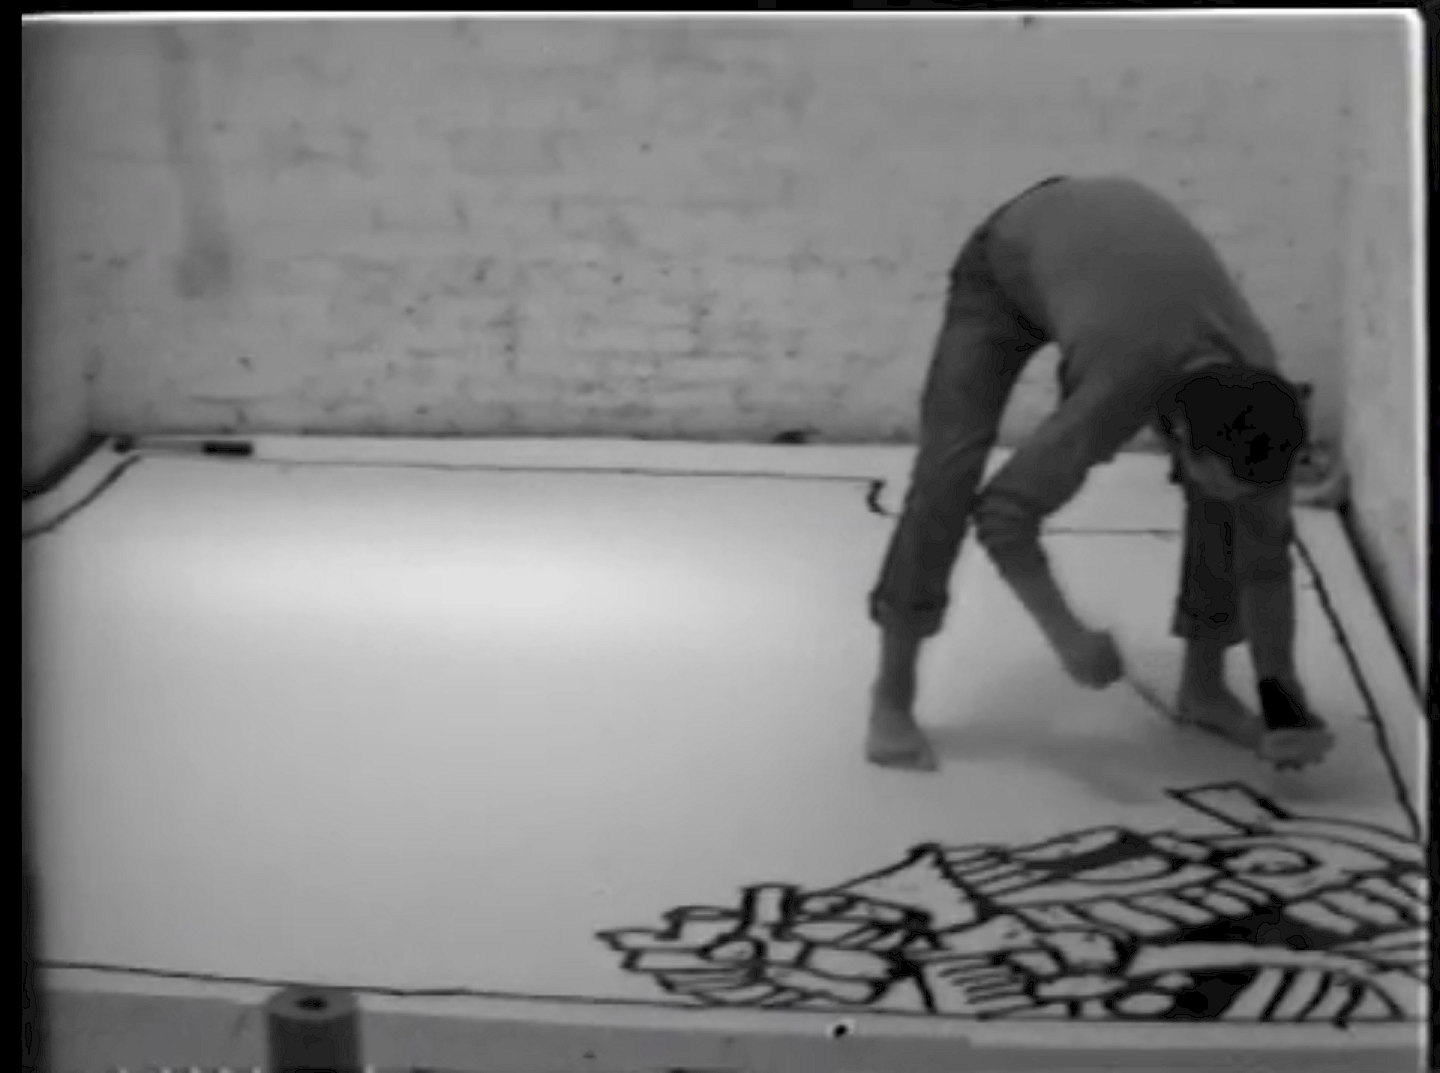 Keith Haring, Painting myself into a corner, 1979, Film Still. Courtesy Keith Haring Foundation.